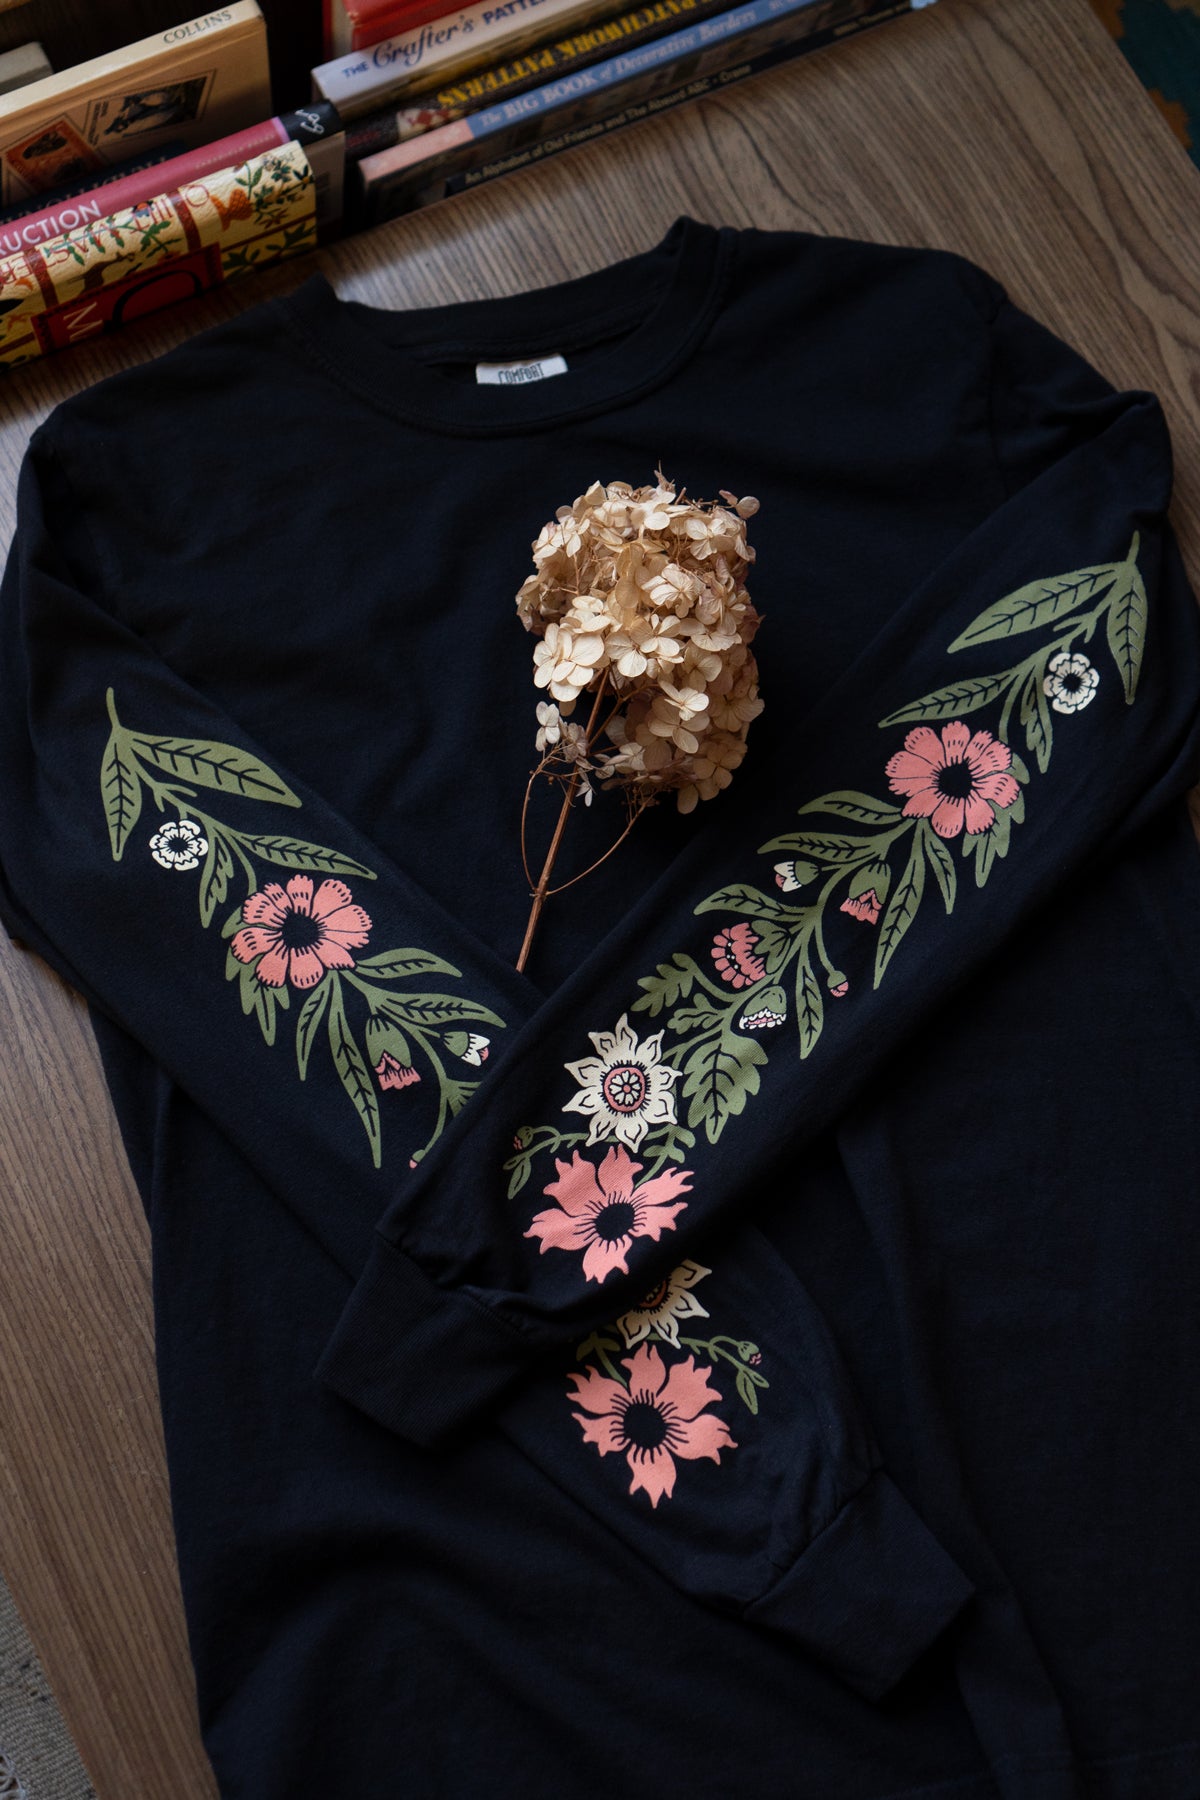 Floral Tops for Women - Flower Top & Shirt, Long Sleeve Floral Top